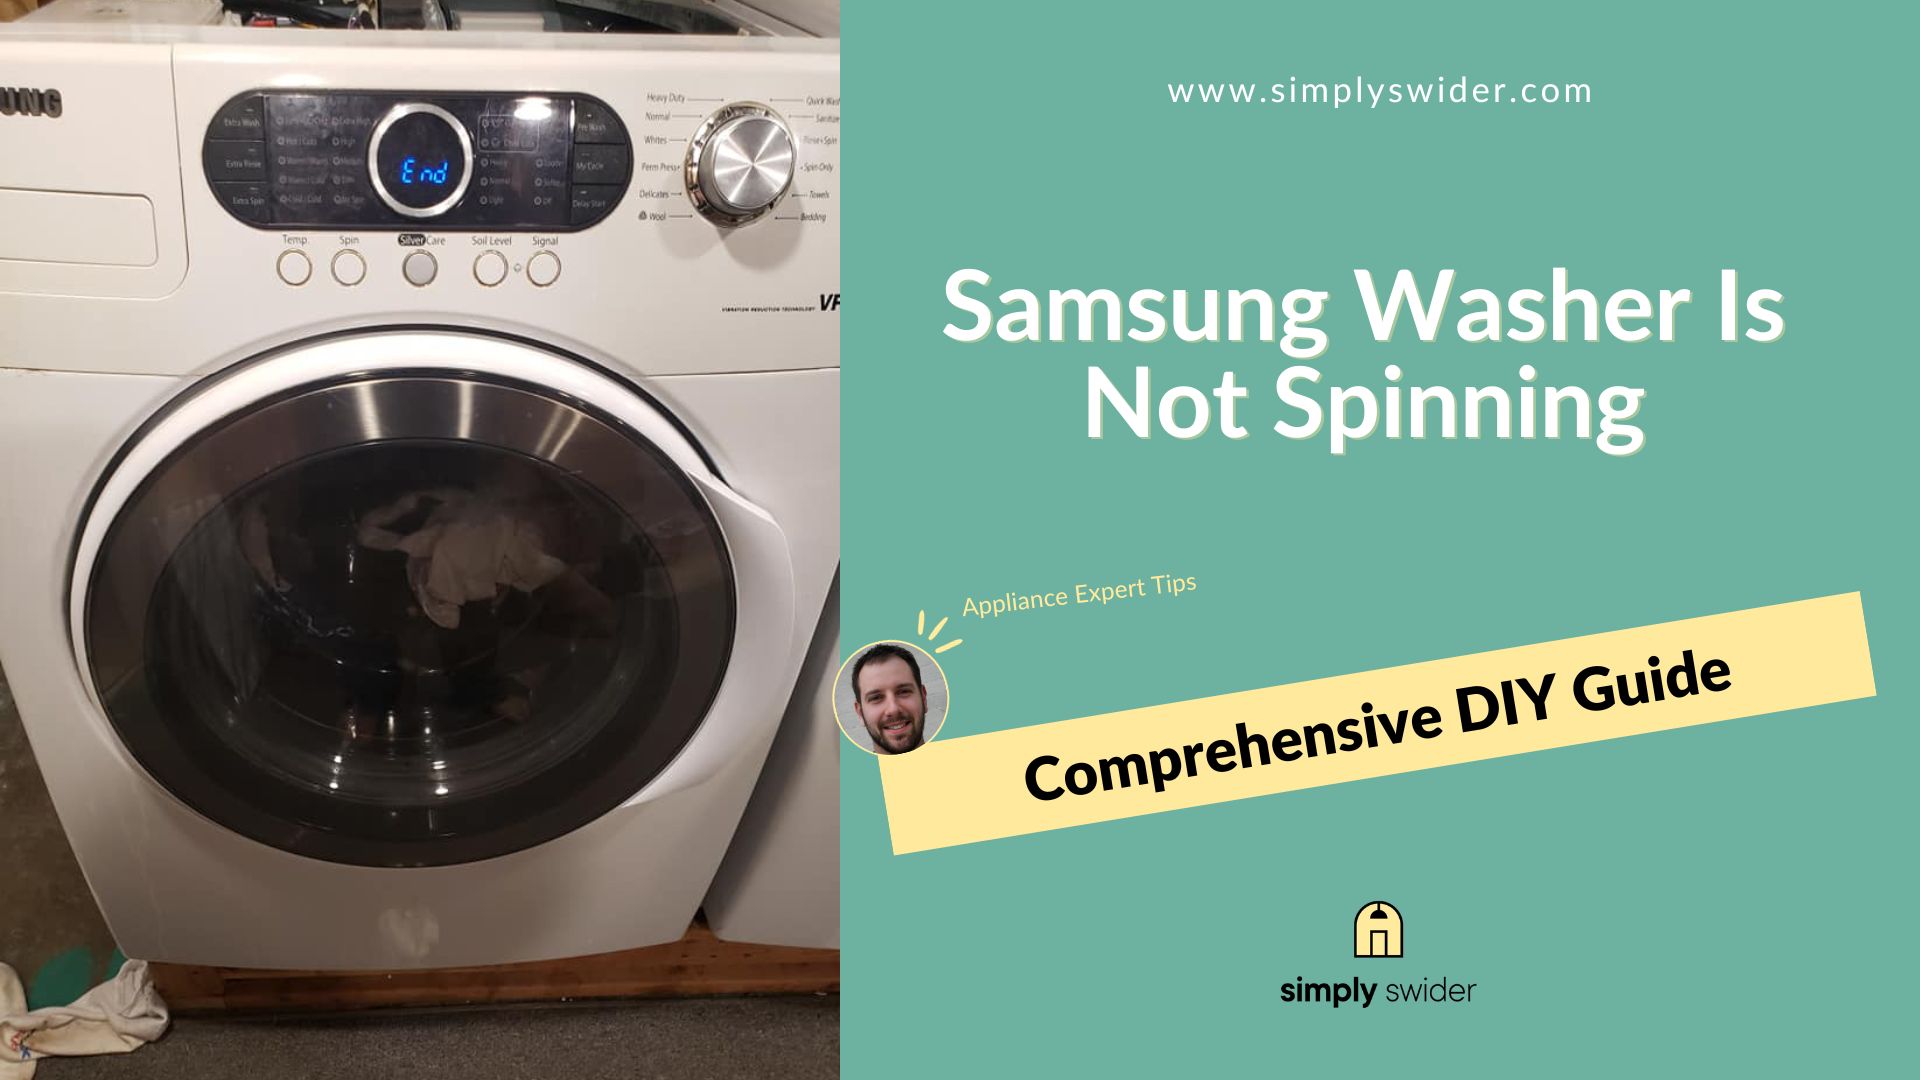 Samsung Washer Is Not Spinning